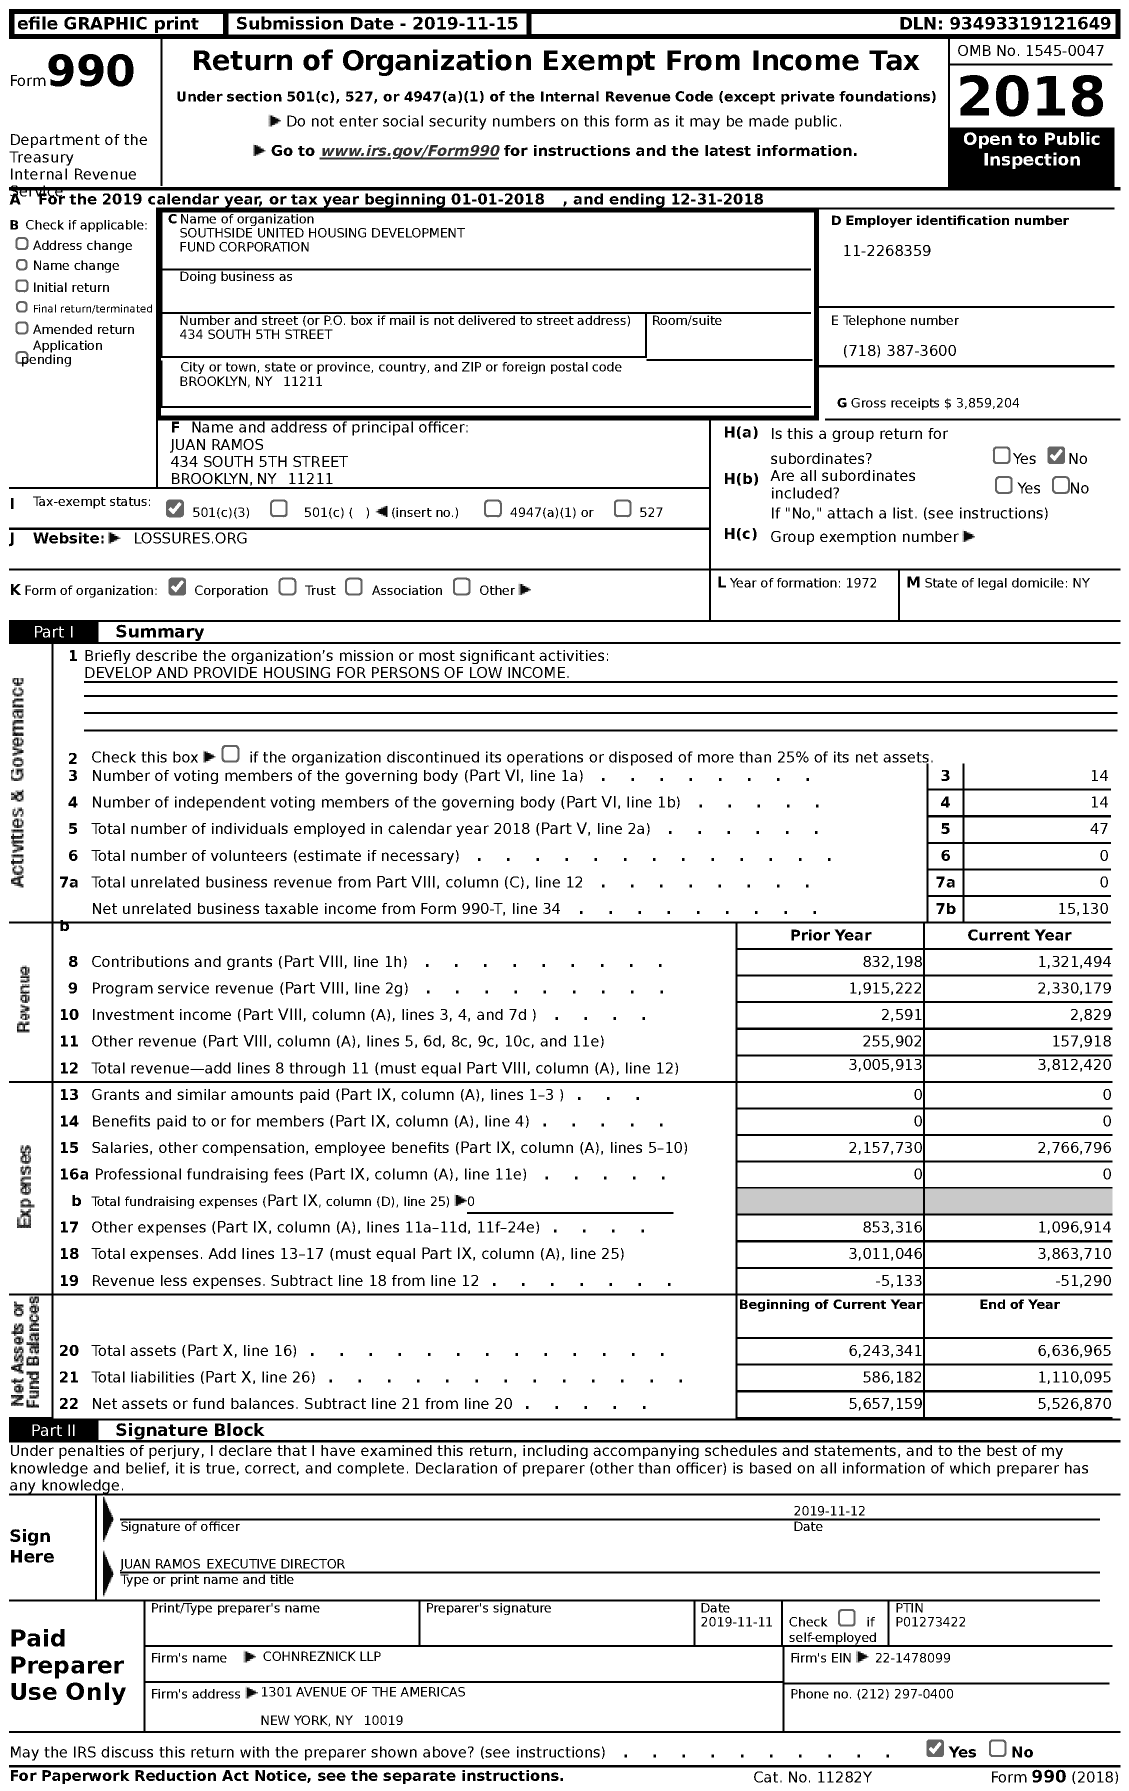 Image of first page of 2018 Form 990 for Southside United Housing Development Fund Corporation